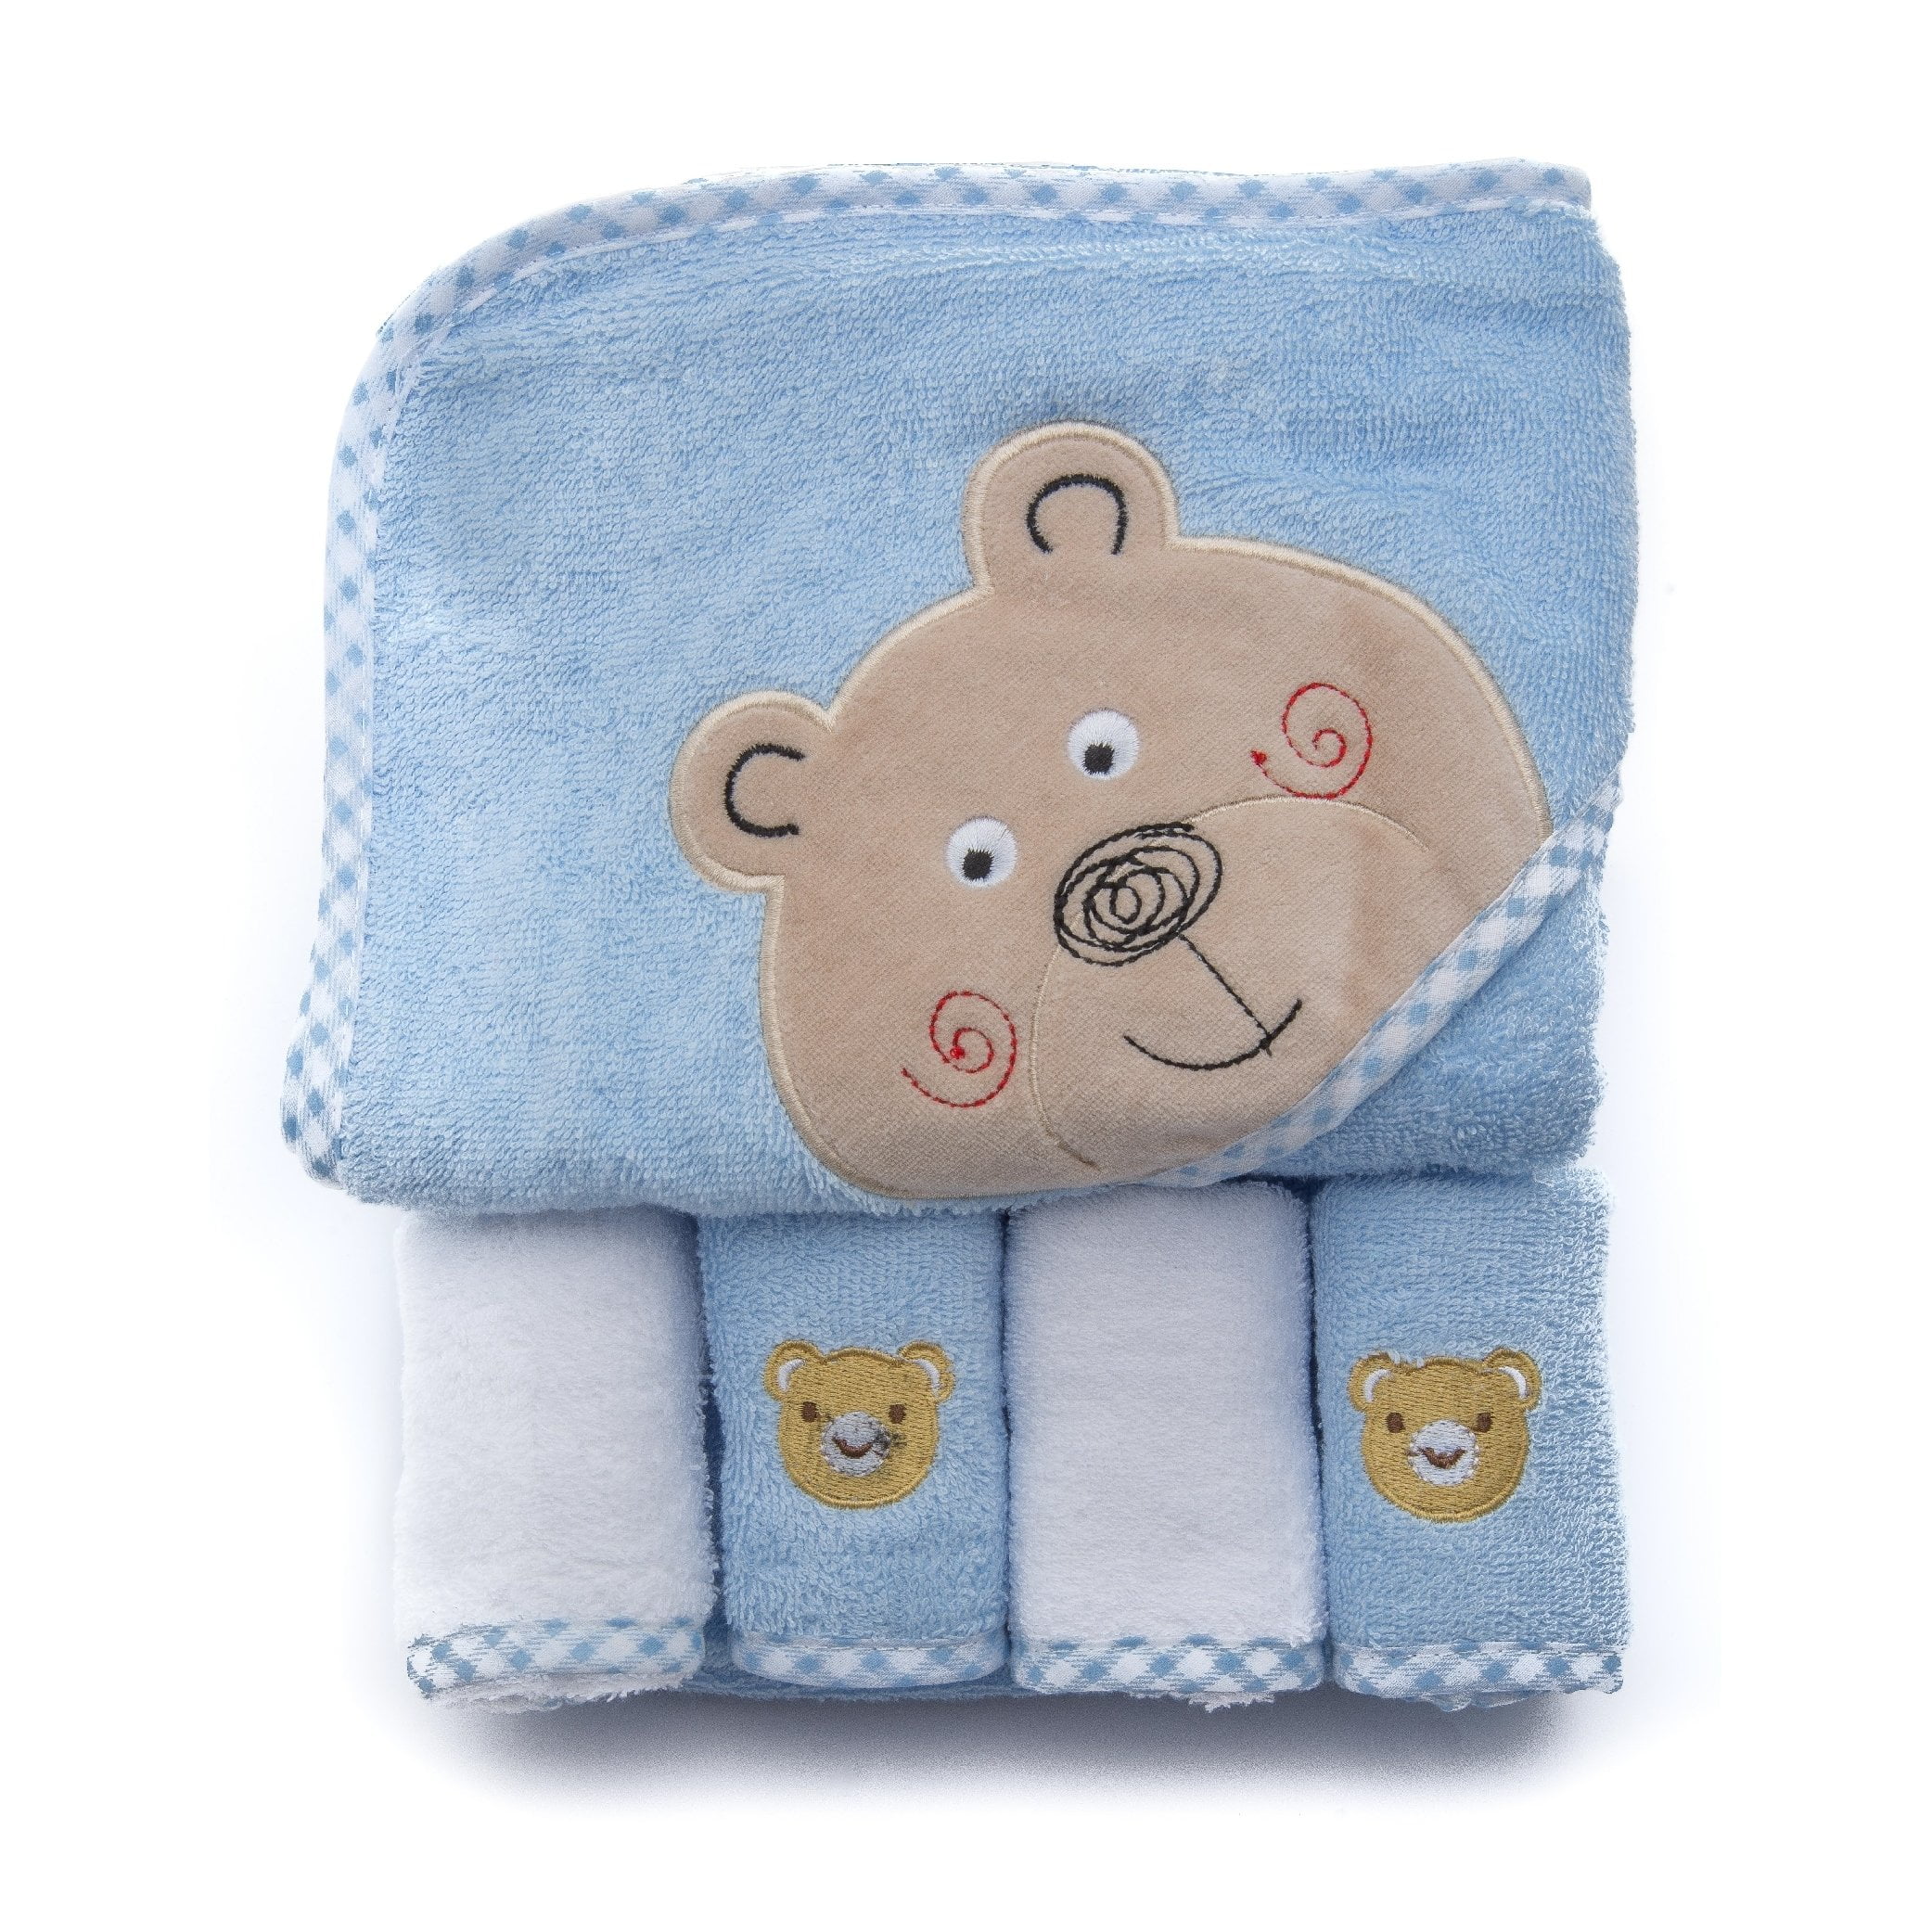 IDGIRLS Animal Hooded Soft Cotton Terry Large Bath Towels for Baby Unisex fit 0-6 Year Old Blue